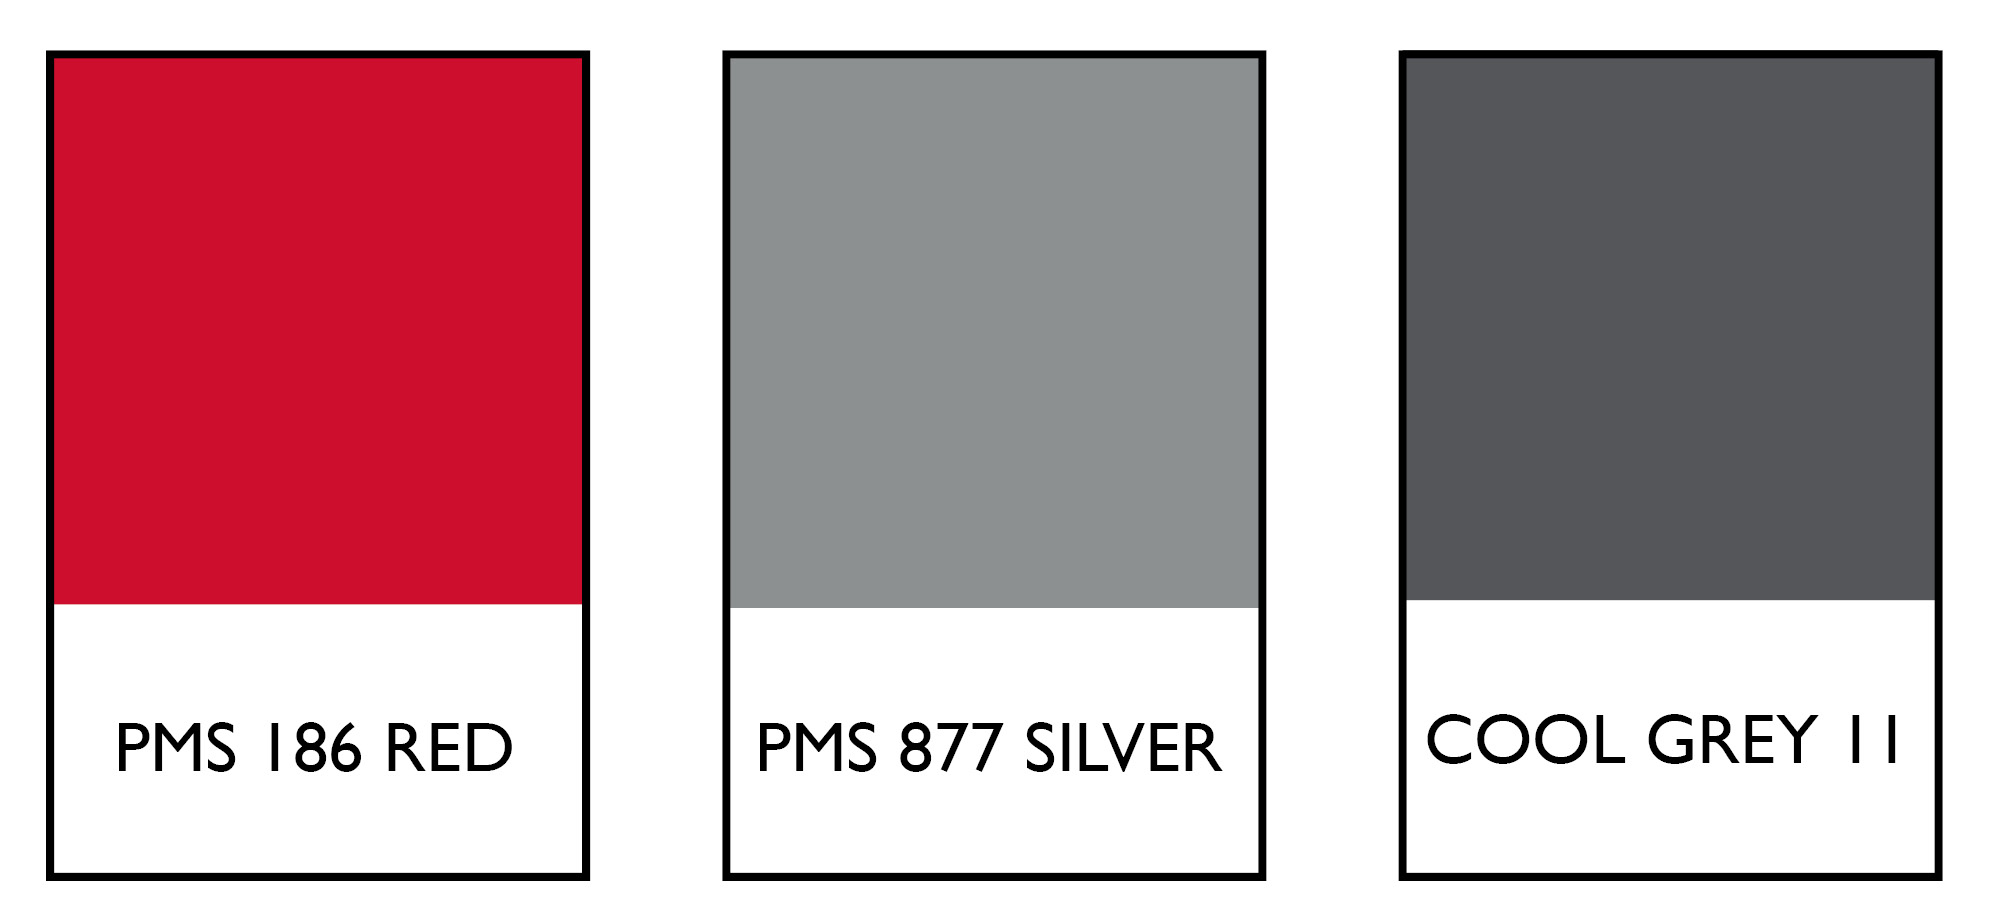 Pantone chips - 186, 877 and Cool Grey 11.